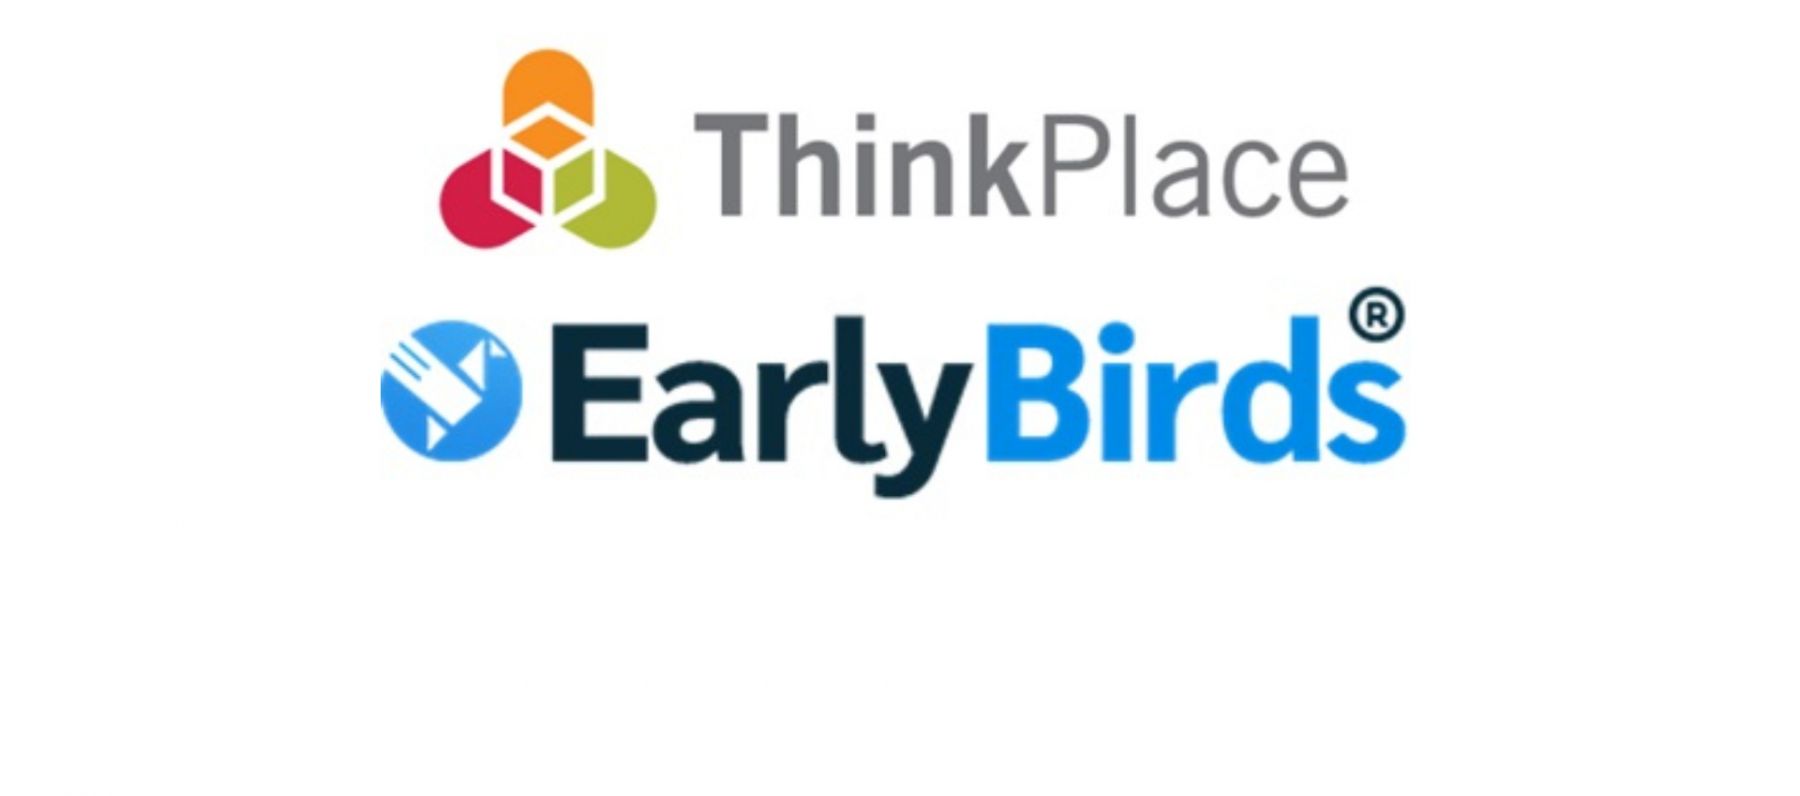 ThinkPlace and Early Birds Join Forces